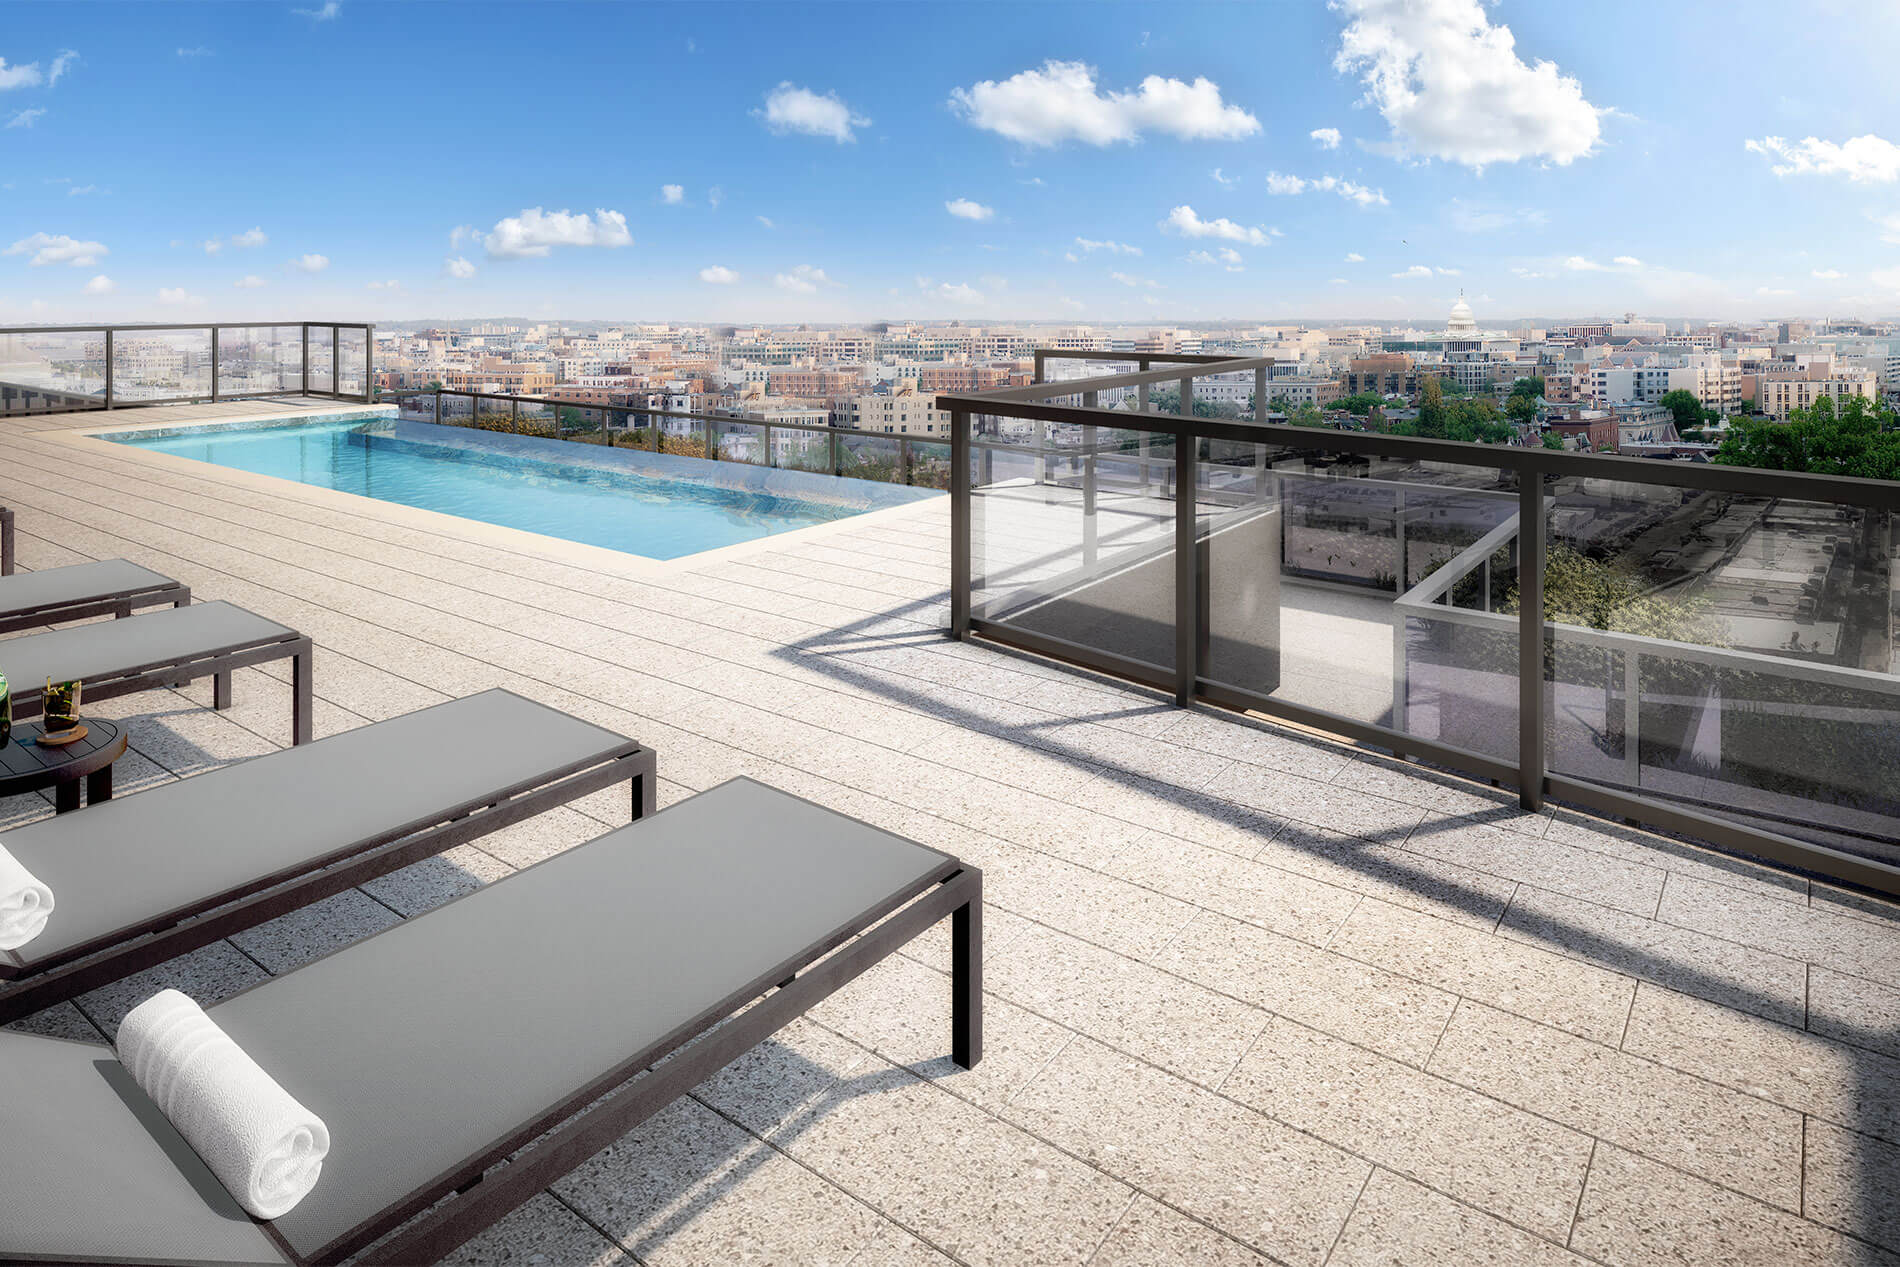 The MO pool deck daytime rendering